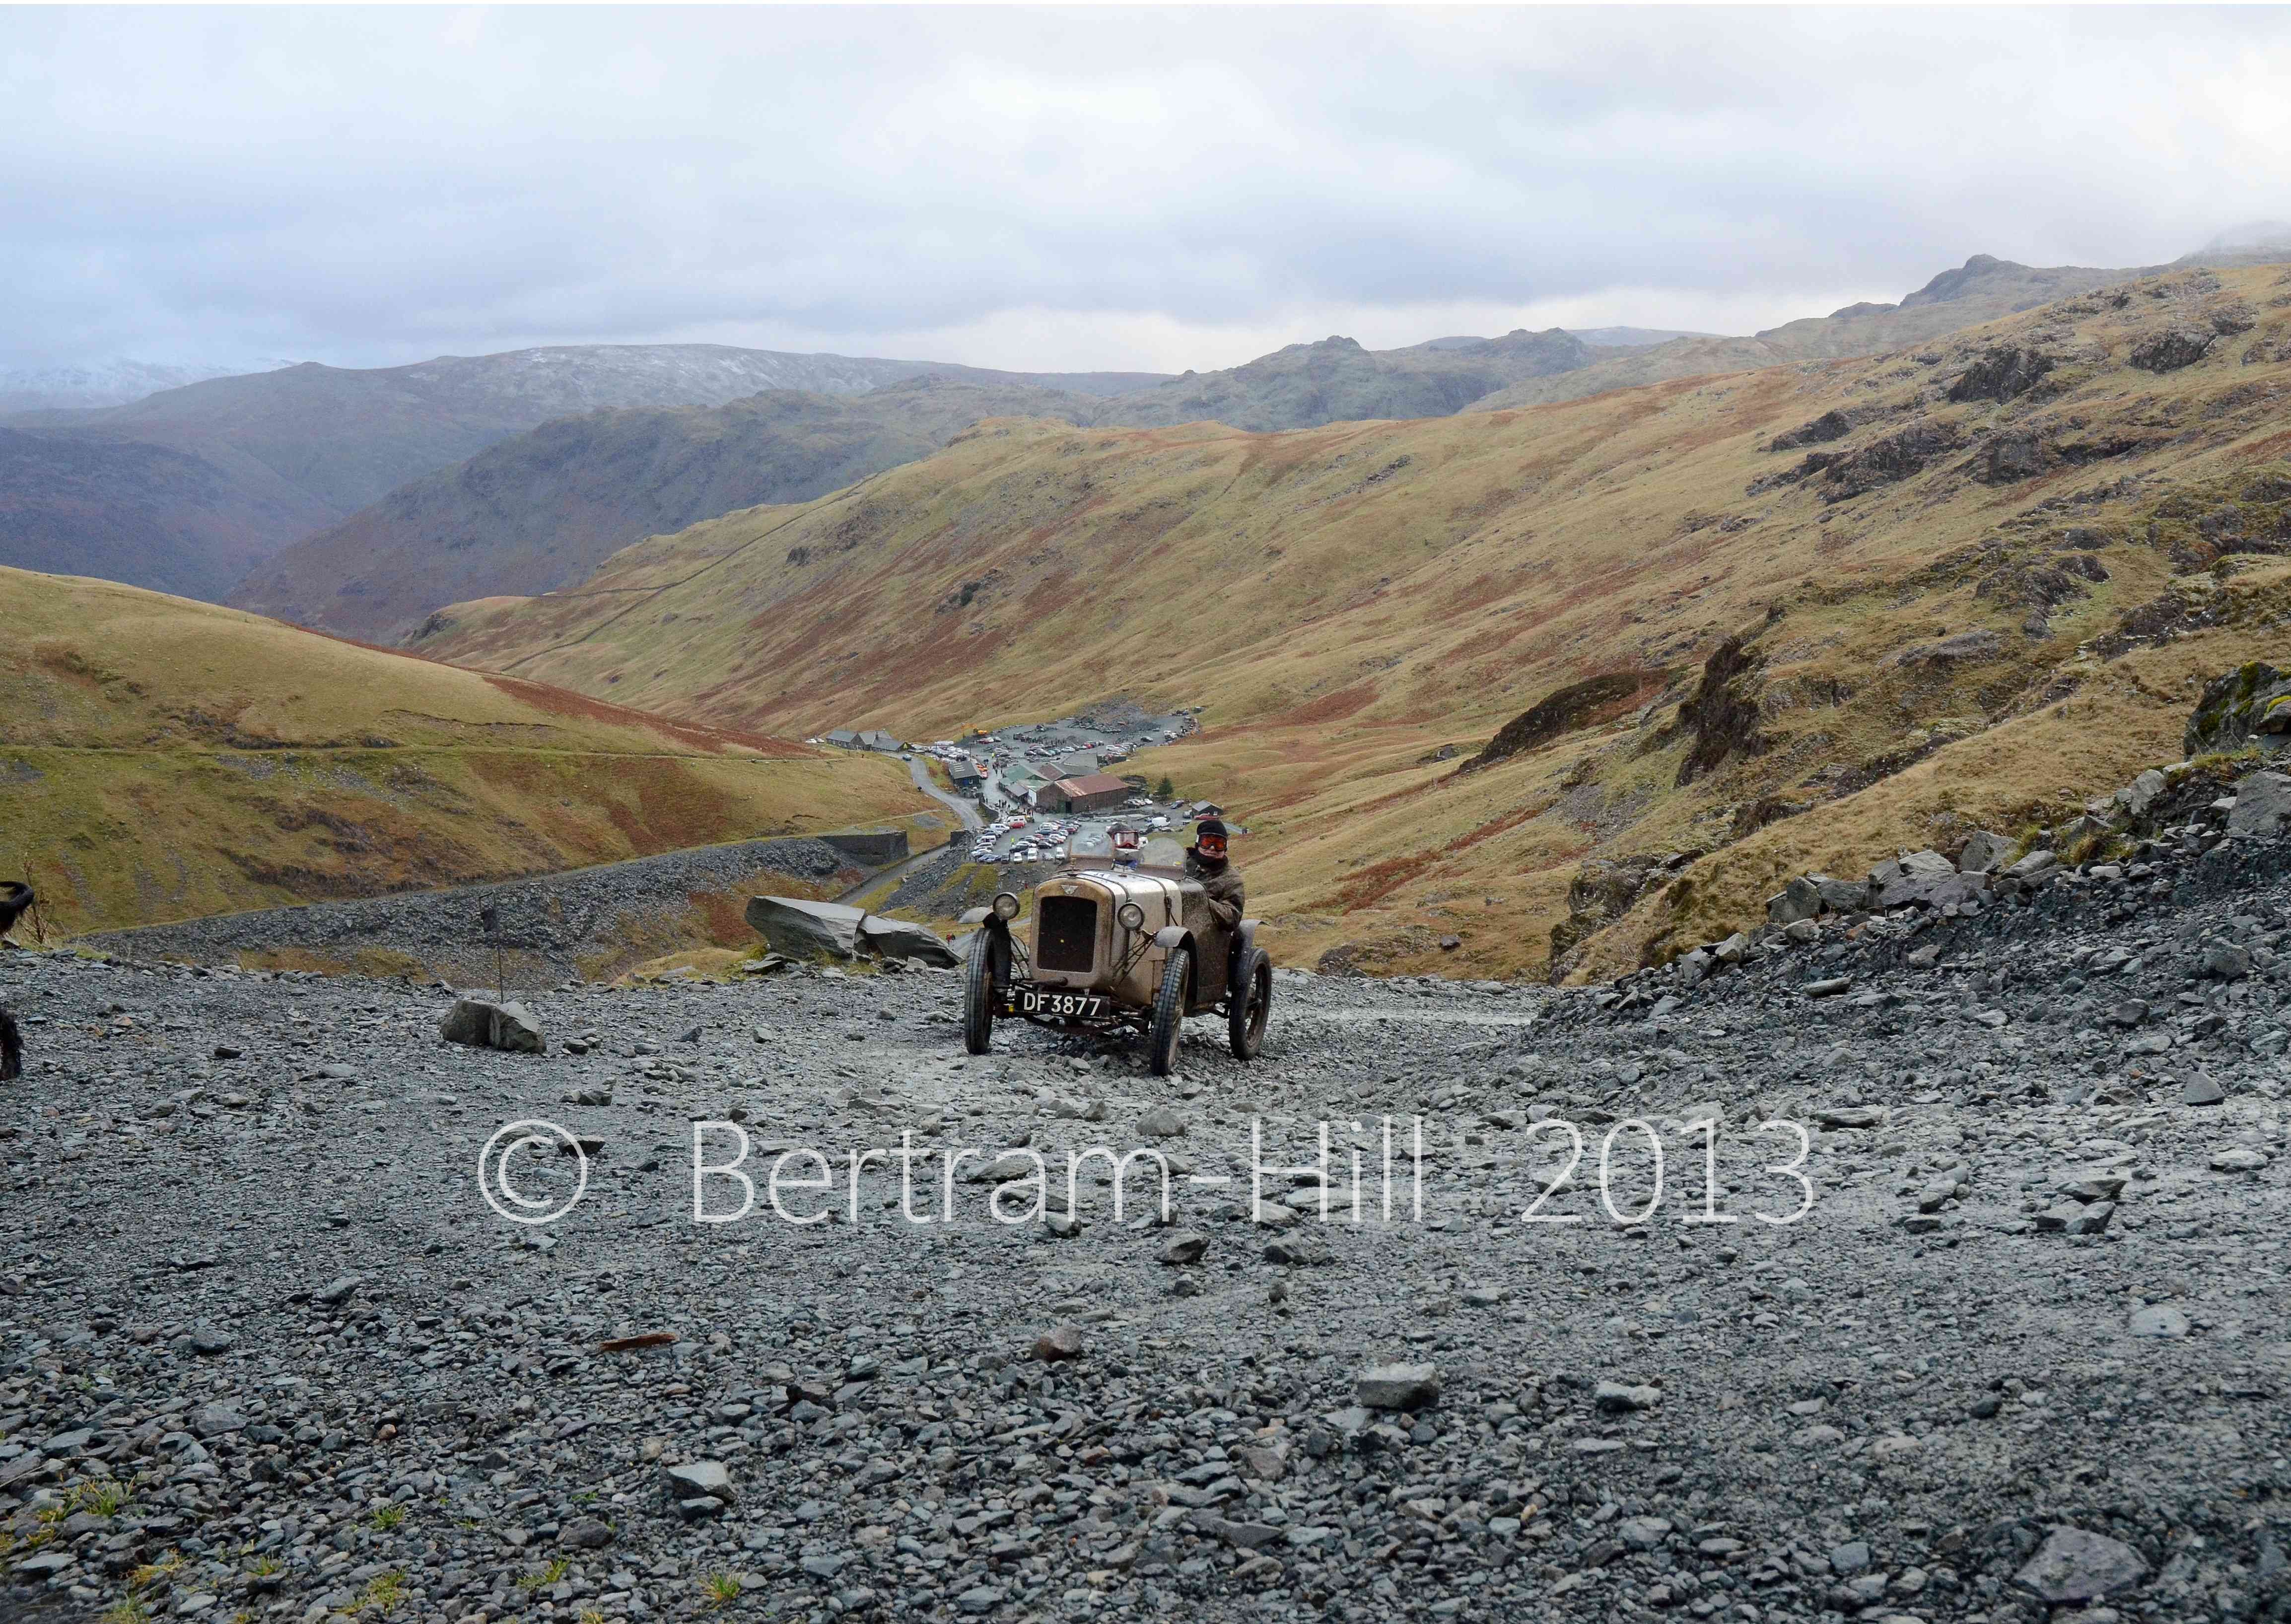 It’s Trialling the ‘Cumbrian Way’ for the VSCC Lakeland Trial this weekend cover